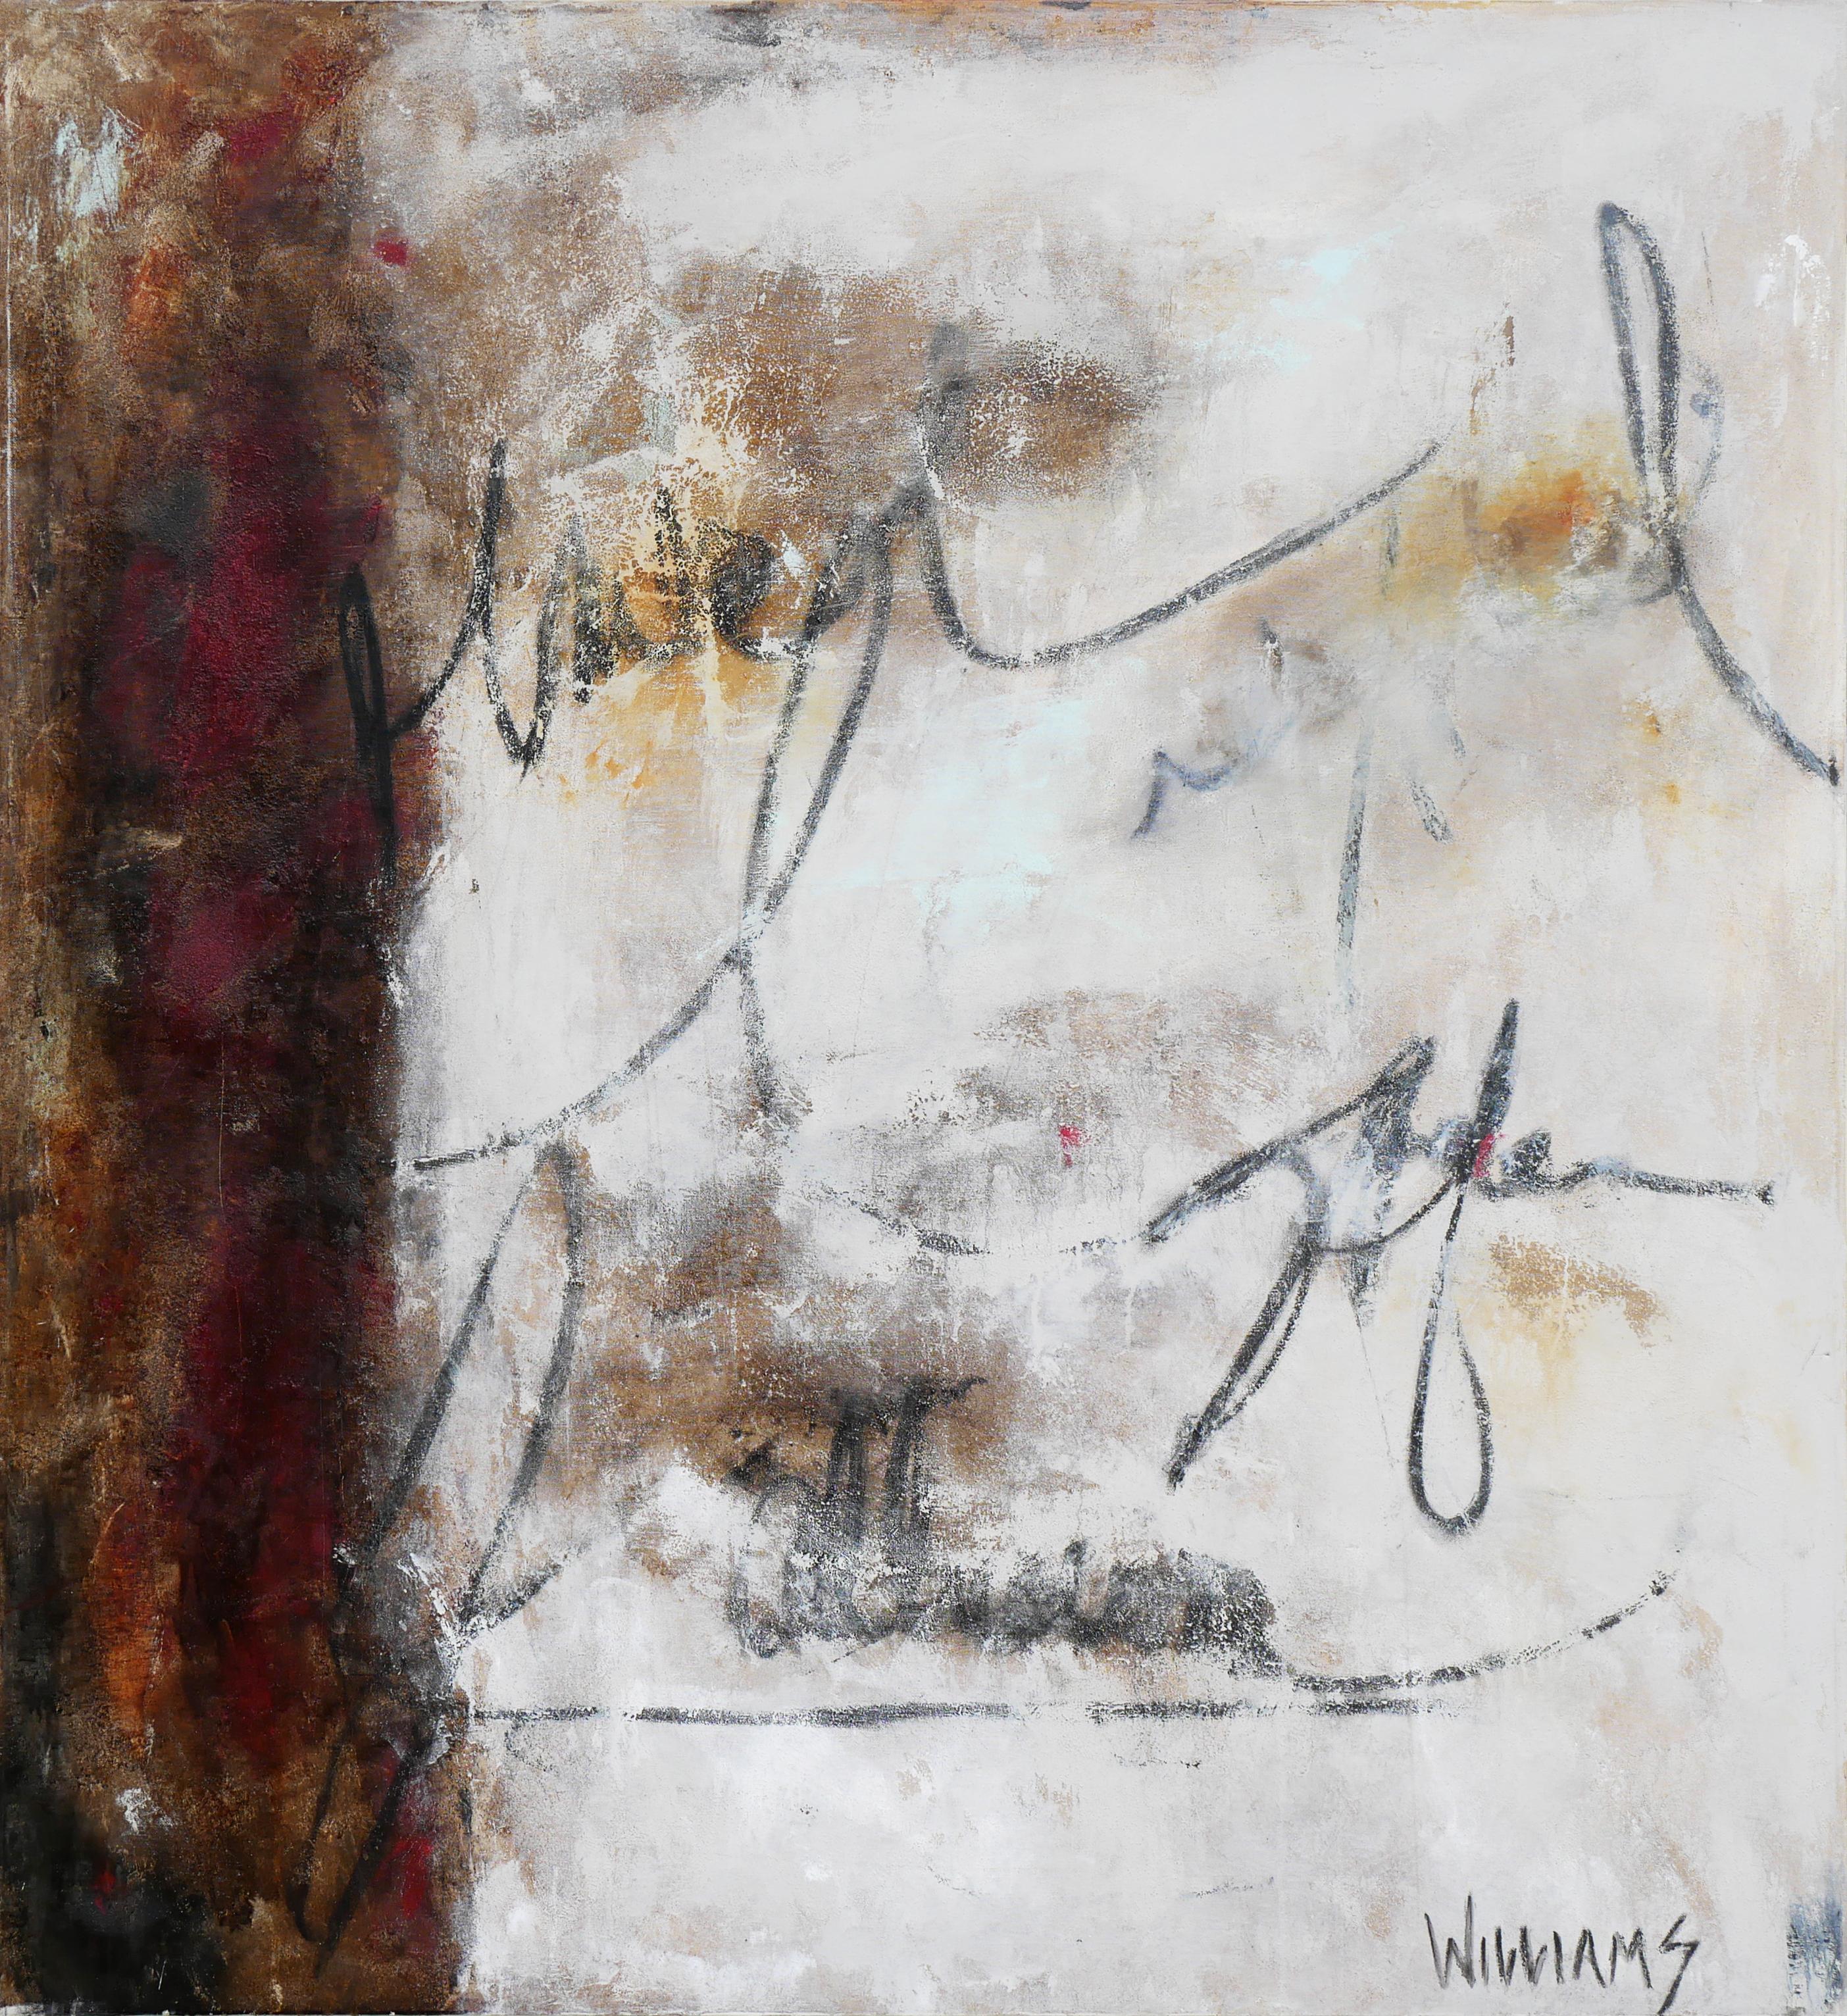 Michelle Williams Abstract Painting - “Latent Allusion 2” Contemporary Abstract Earth Toned Mixed Media Painting